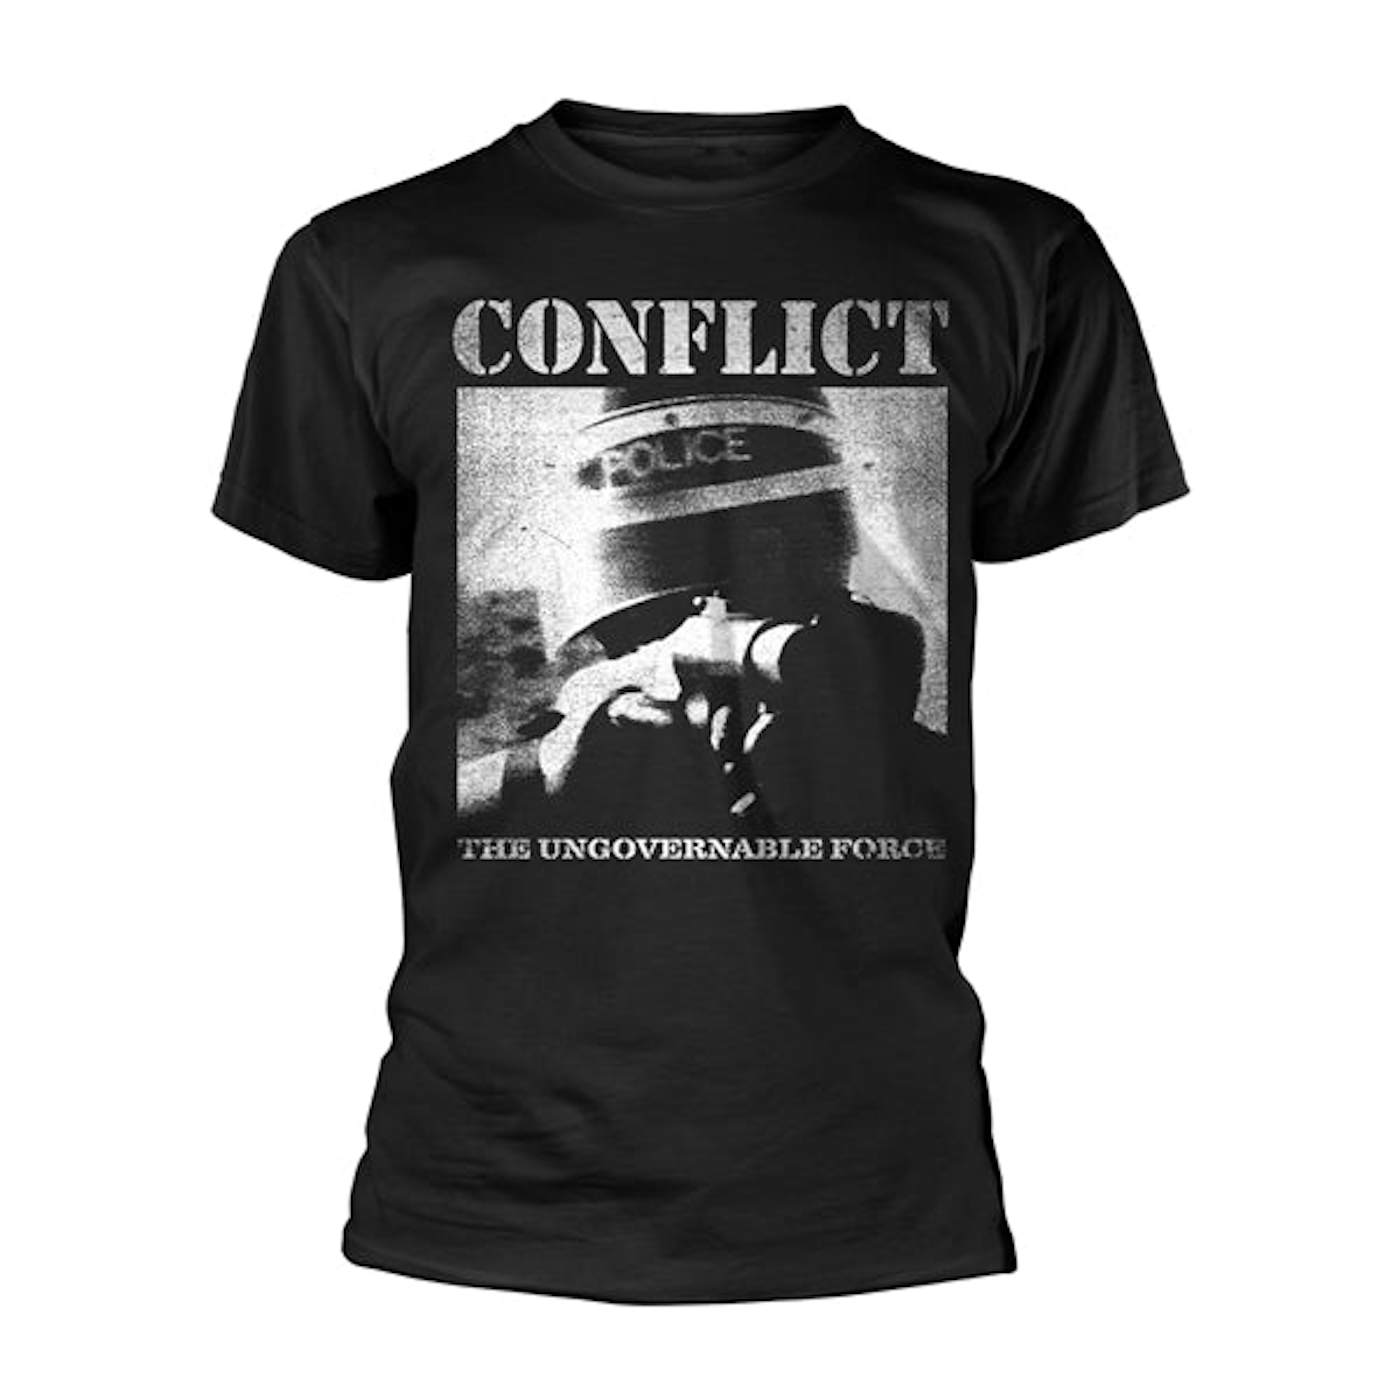 Conflict T Shirt - The Ungovernable Force (Black)